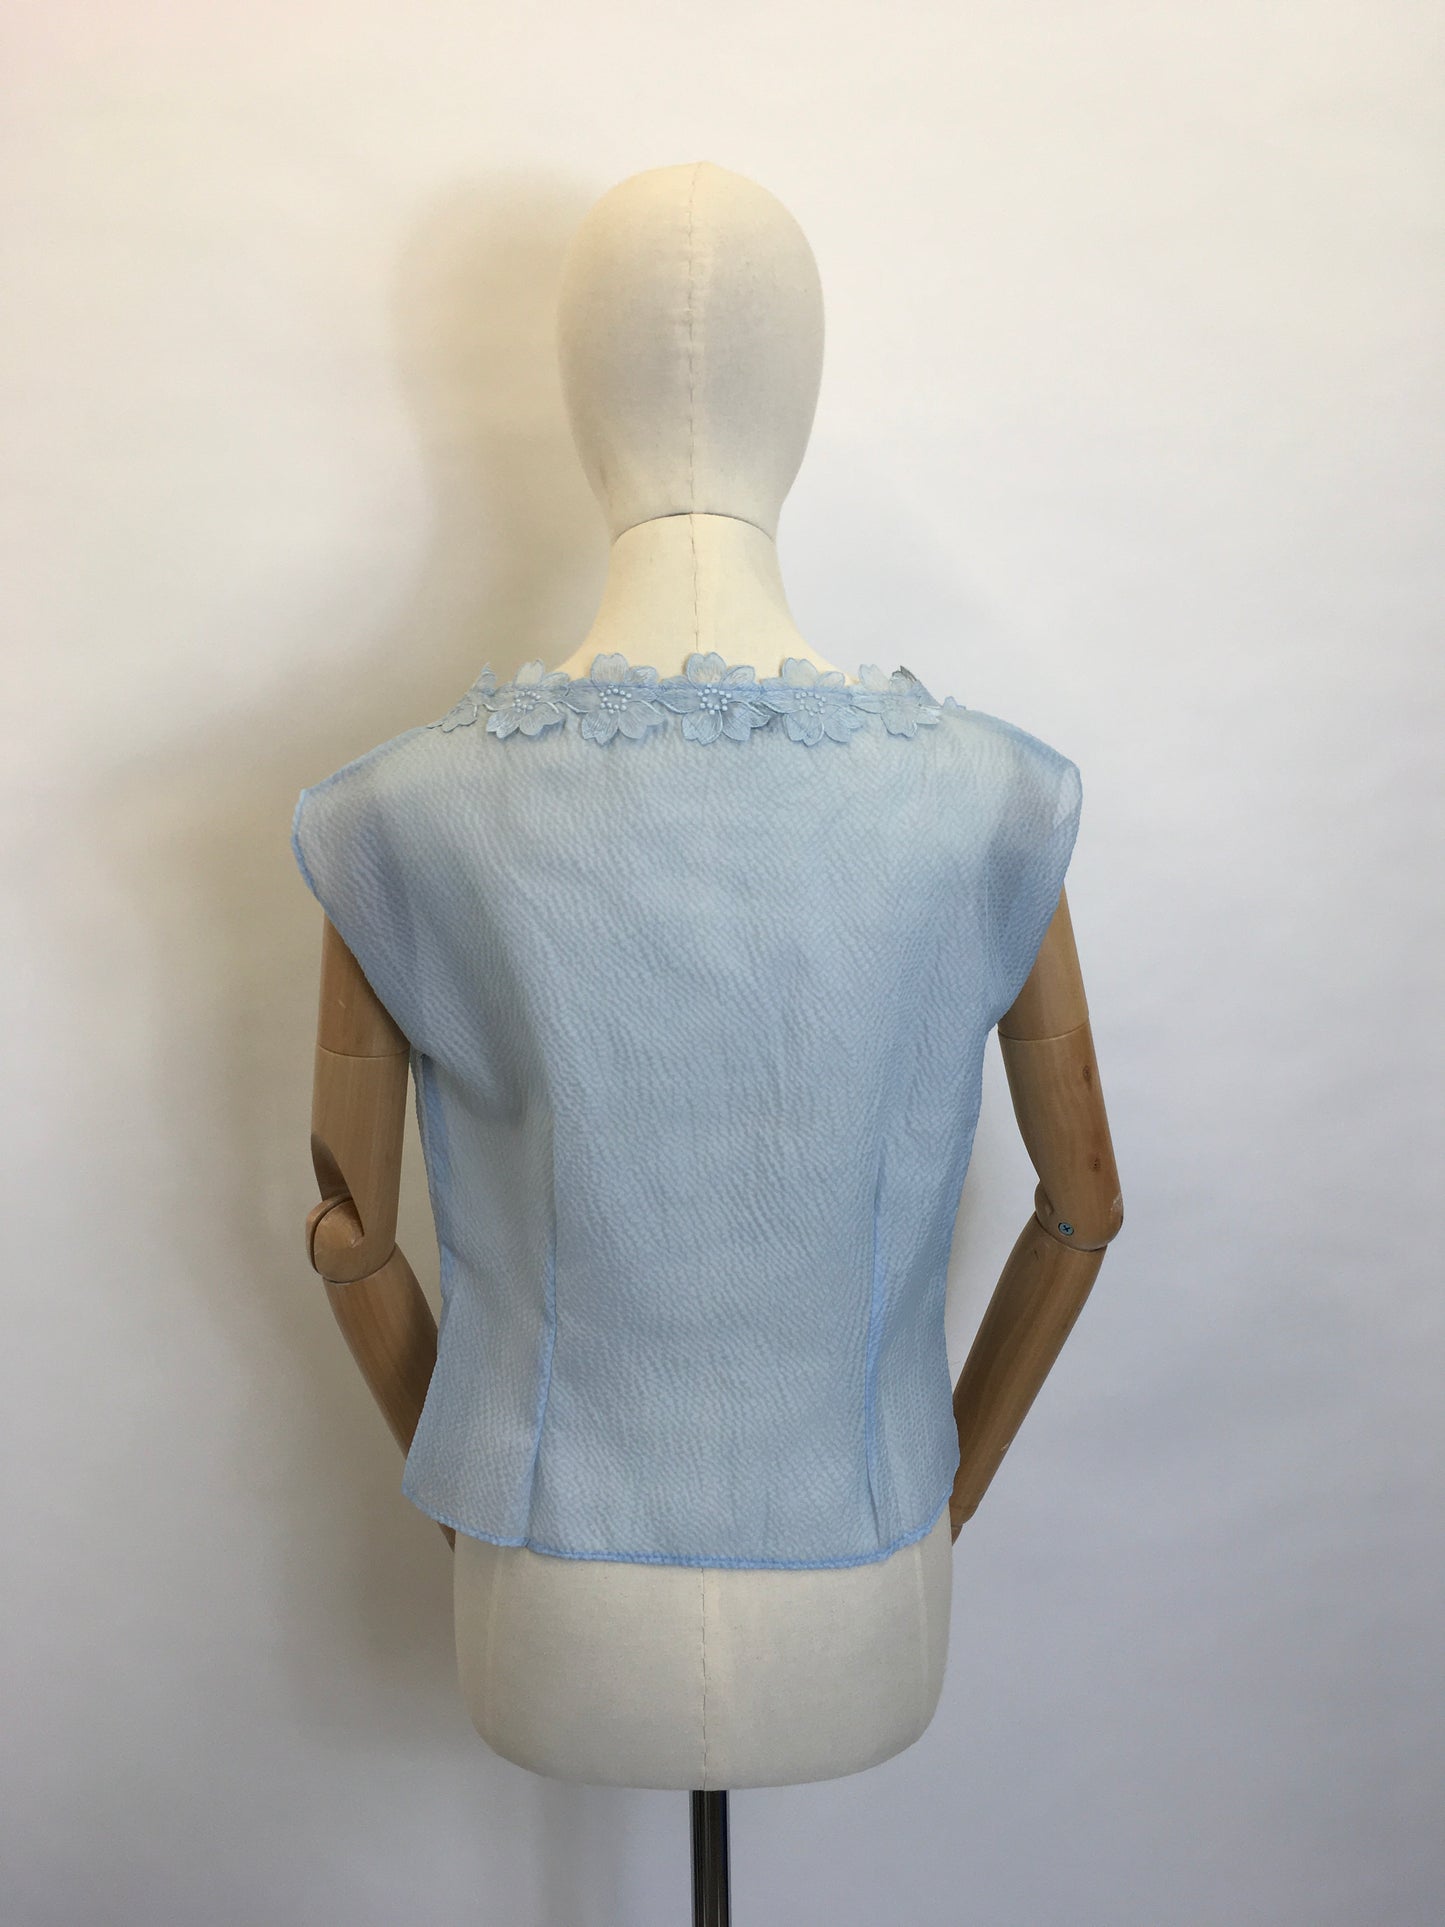 Original 1950’s Sheer Blouse in a lovely Powder Blue - Featuring Floral Detailing to the Neckline